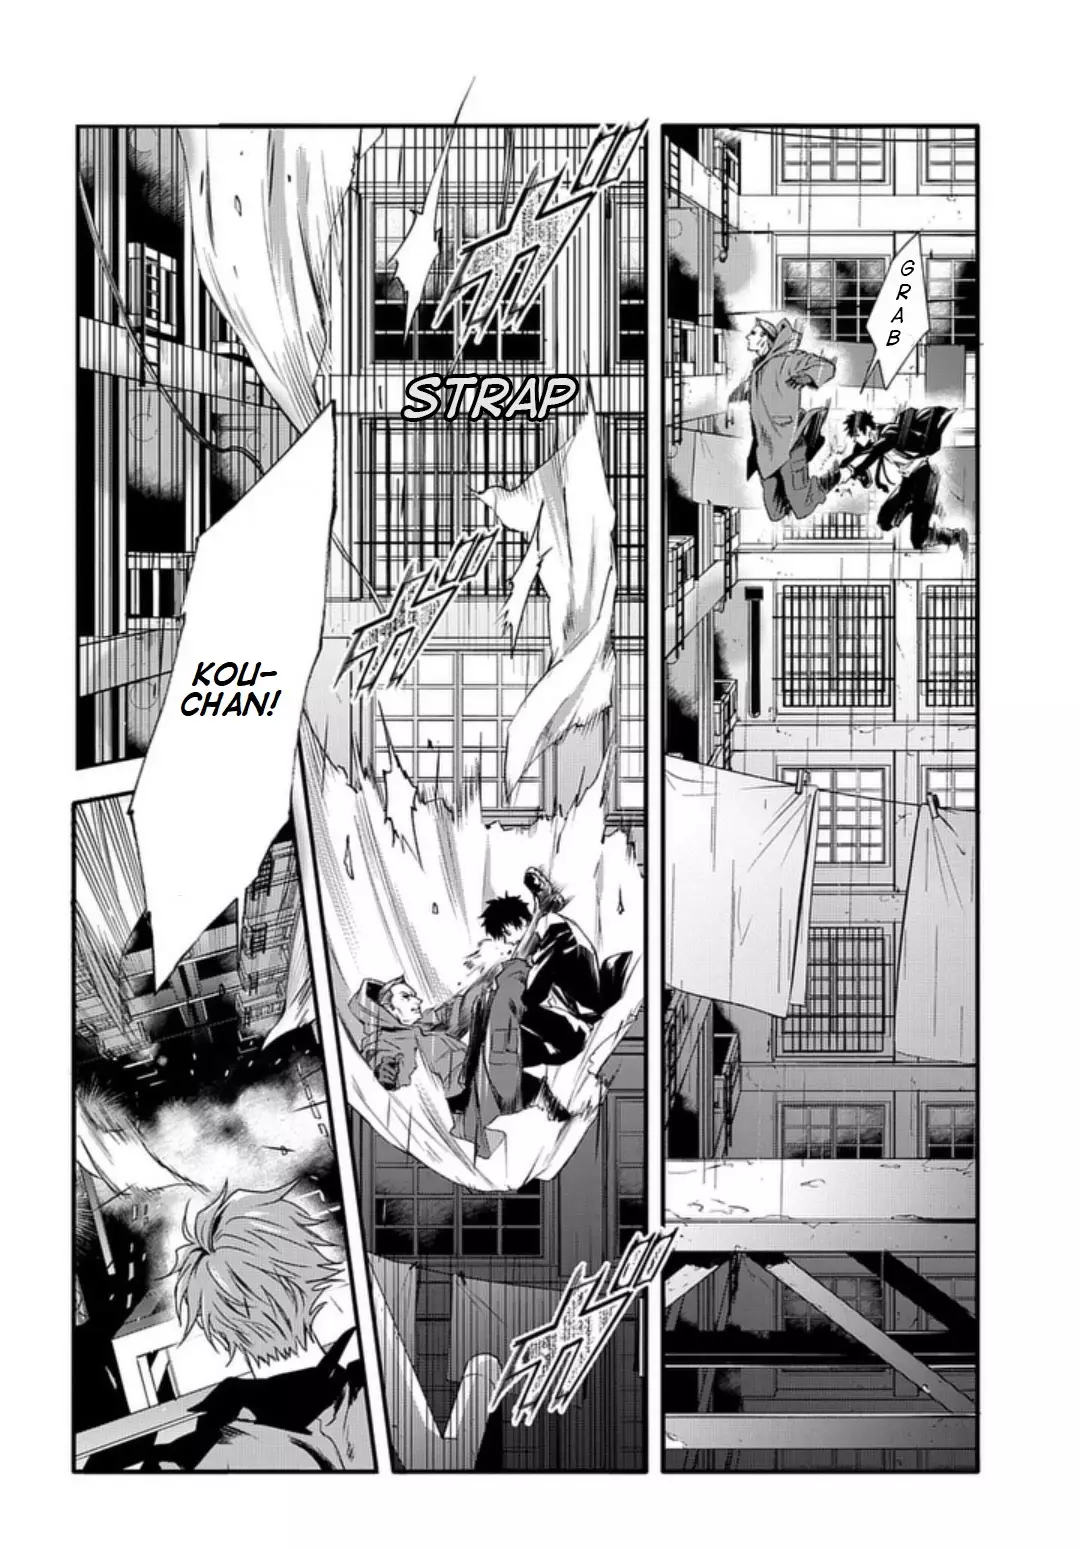 Psycho-Pass: Sinners Of The System Case 2 - First Guardian - 5 page 6-7ed70ea9